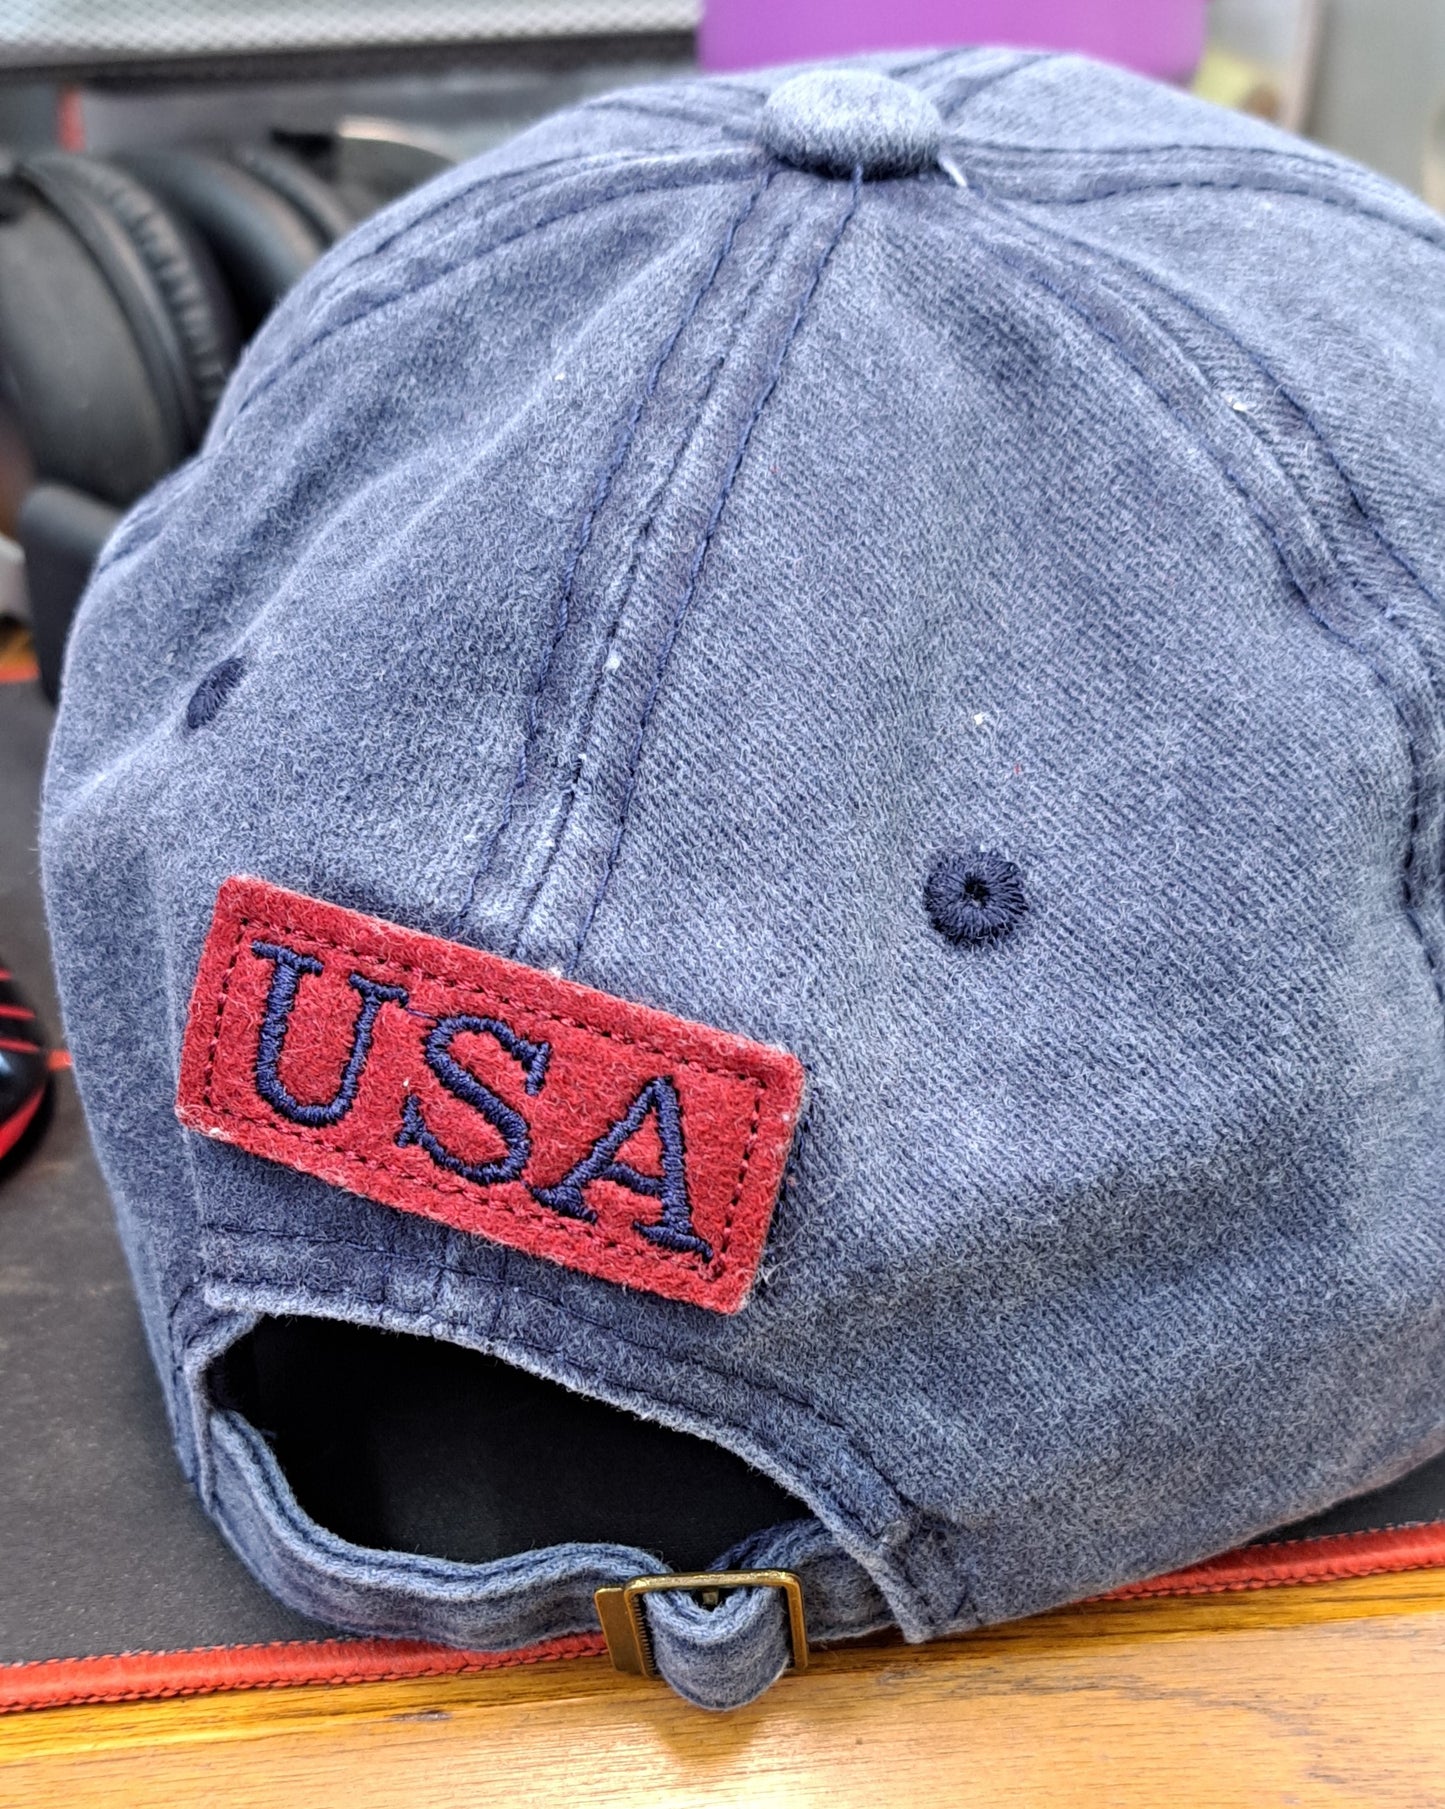 American Flag USA Embroidered Solid Unstructured Hat